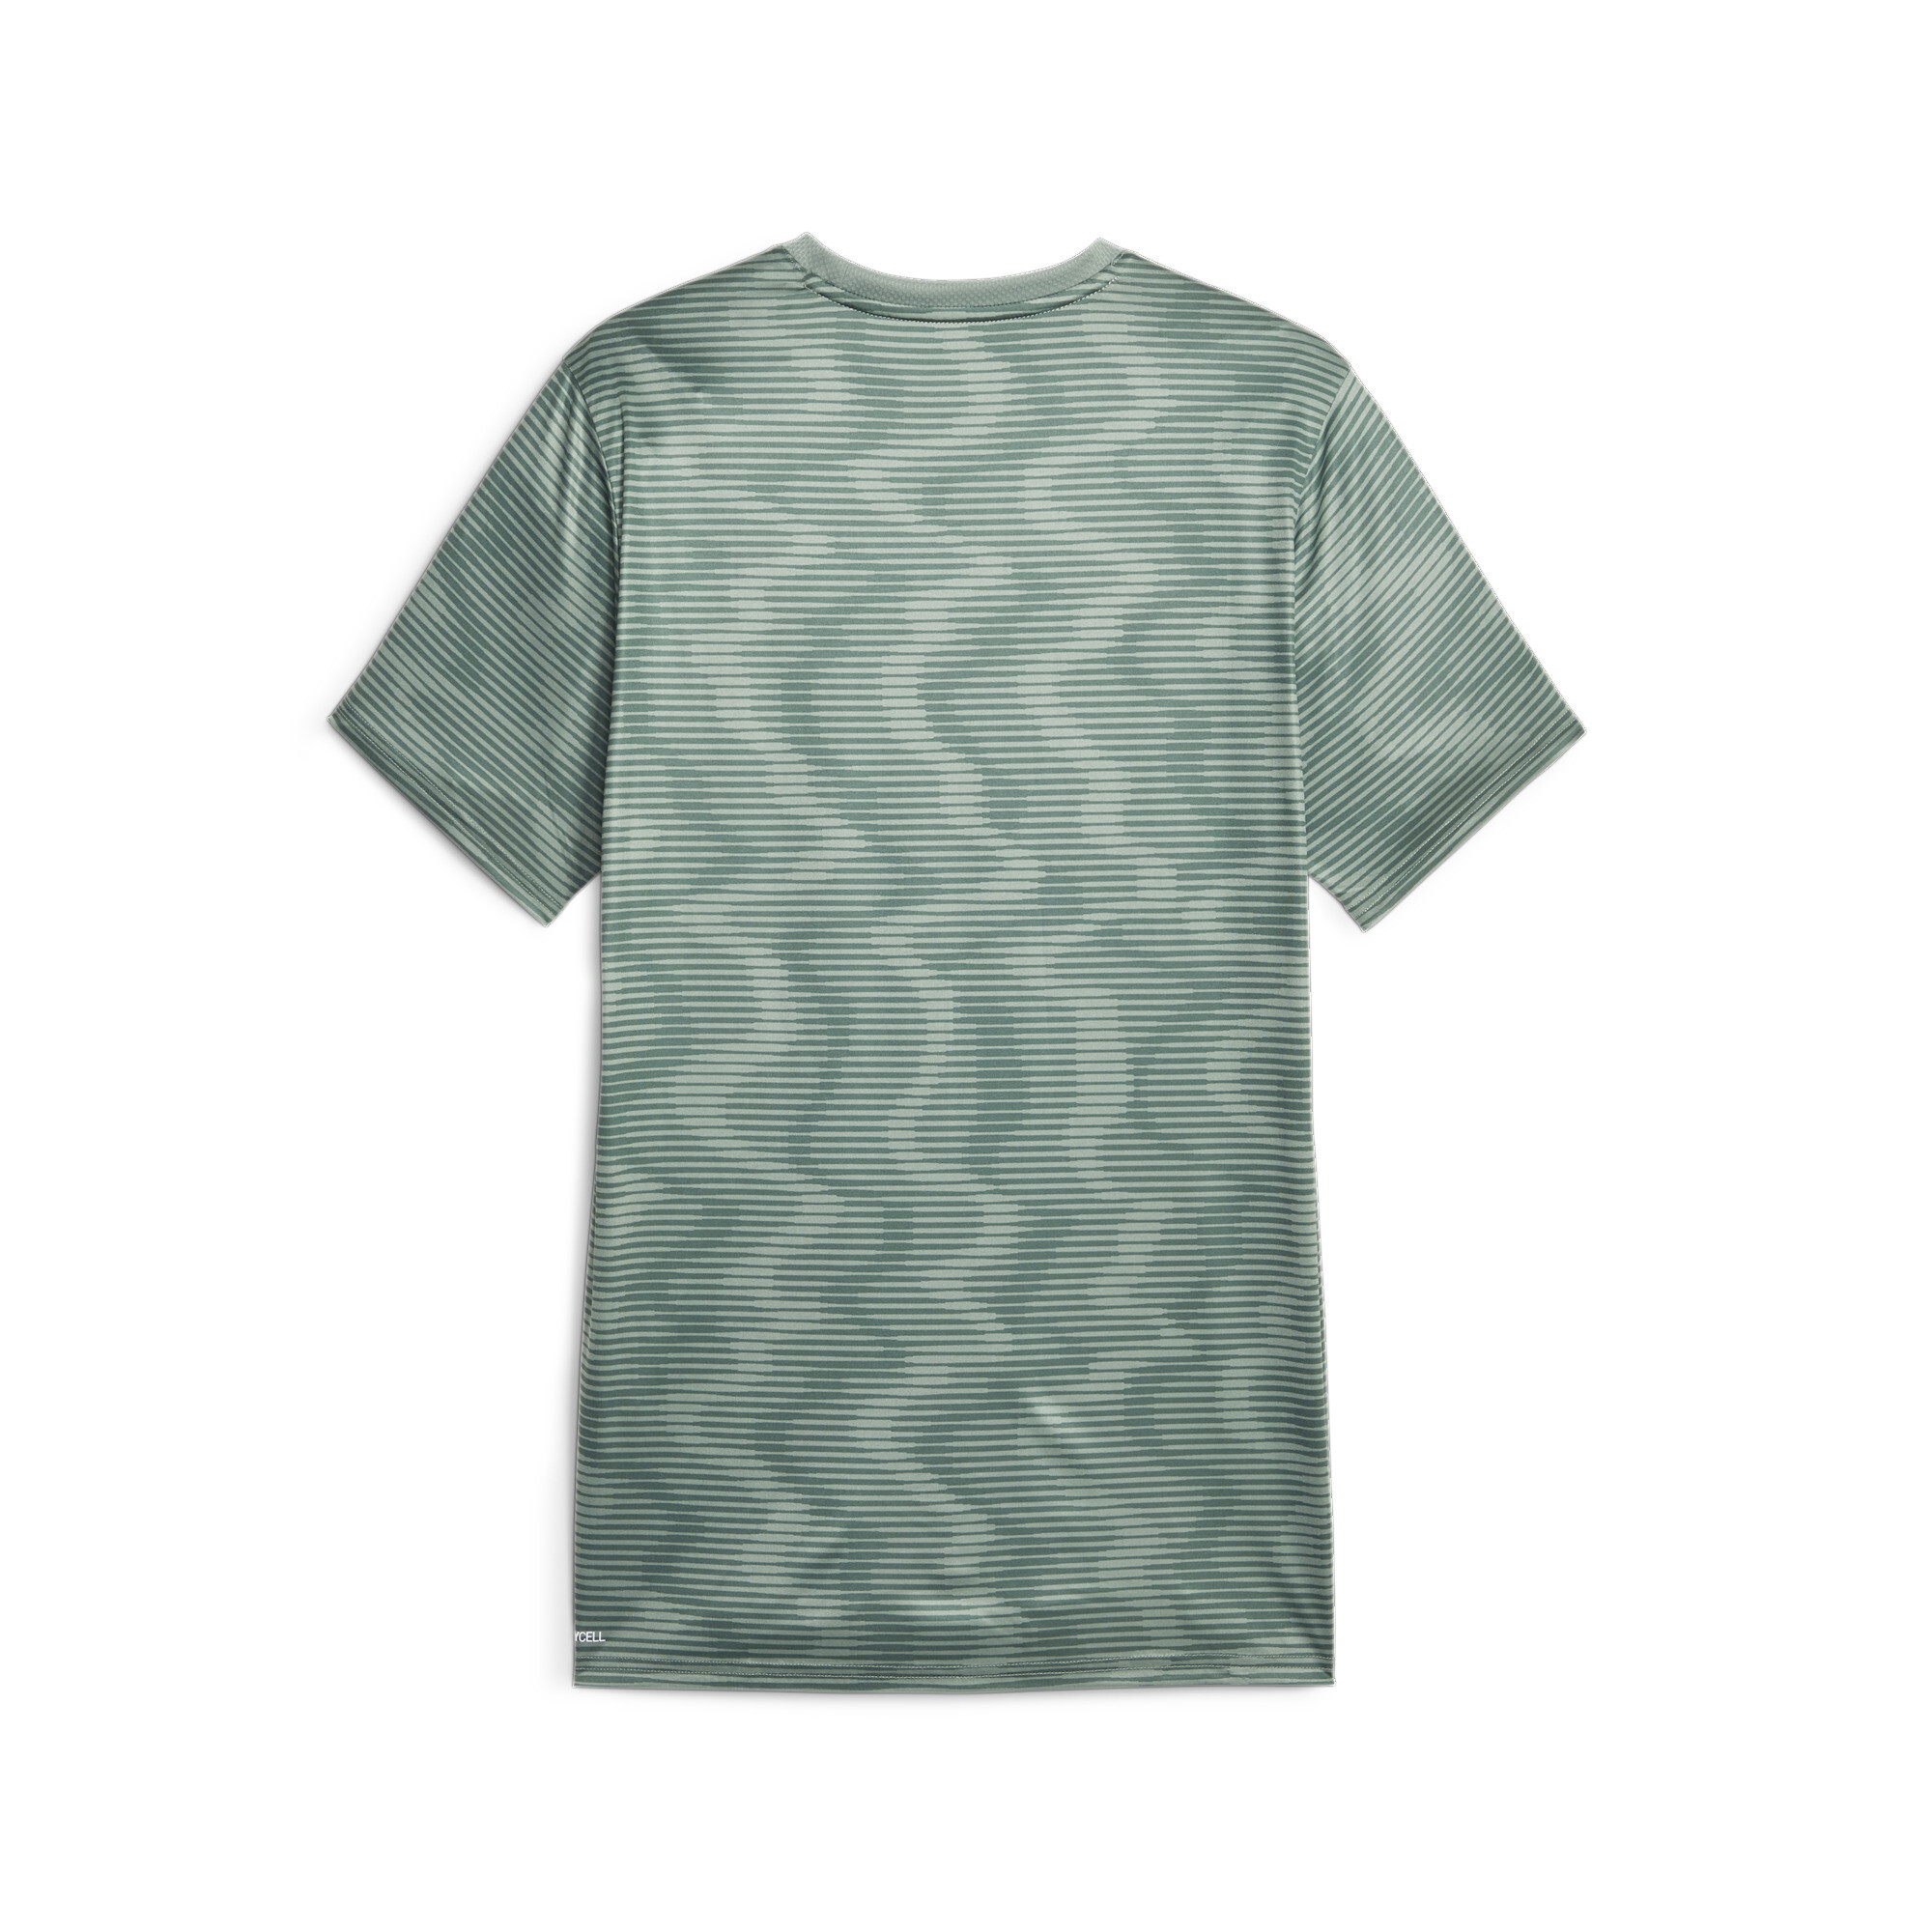 Men's PUMA M Concept Hyperwave Training T-Shirt In Green, Size Small